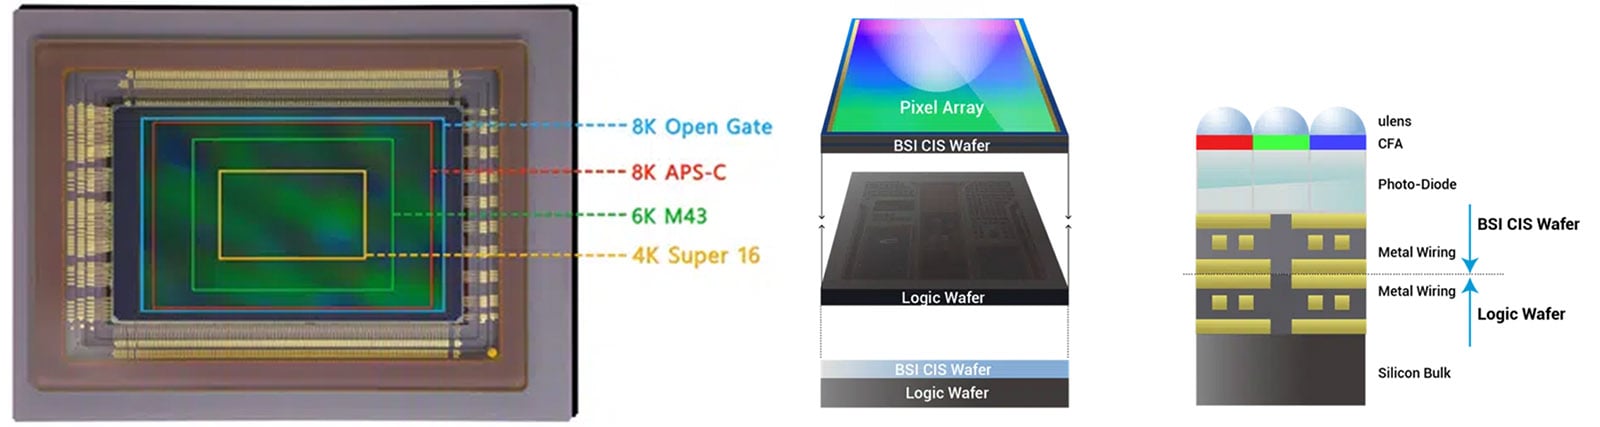 Gpixel company release image of its new APS-size CMOS image sensor